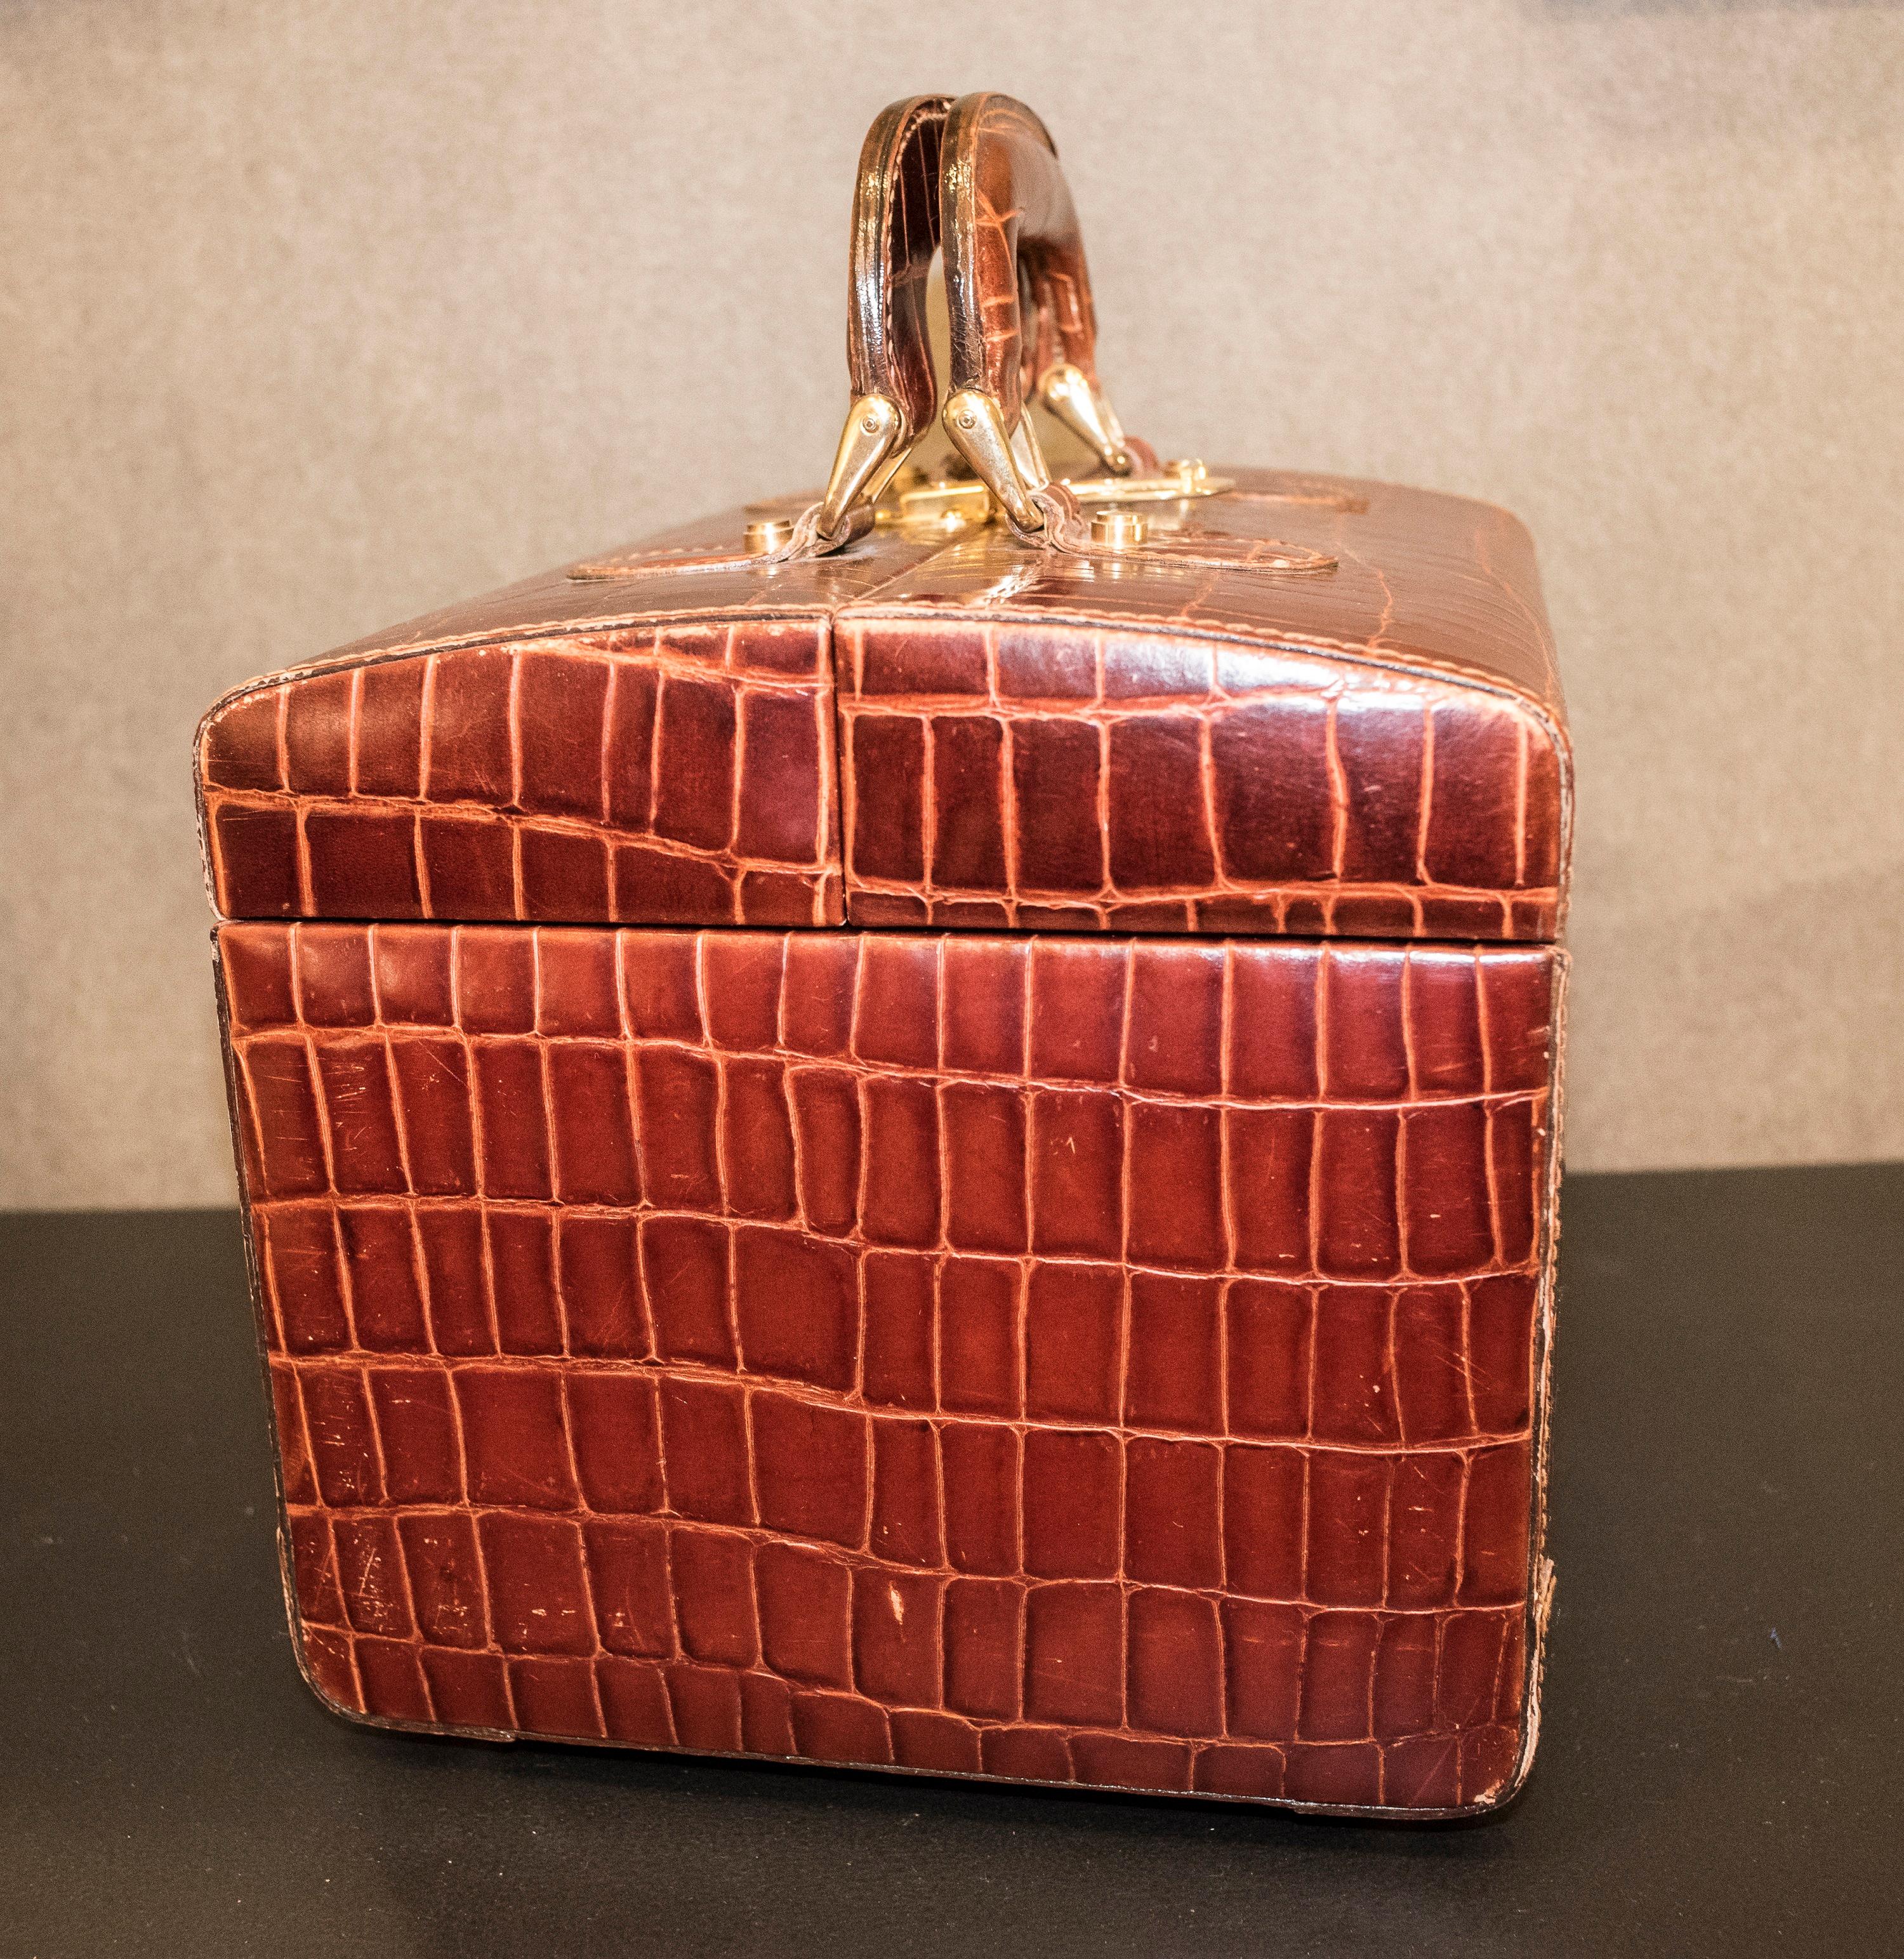 Beautiful and timeless Italian brown leather vanitycase or jewelry box by Marco Tahini, label inside.
Box-shaped vanitycase in leather worked in snake effect. Inside there are several department, a removable try and a mirror. With handles and gold